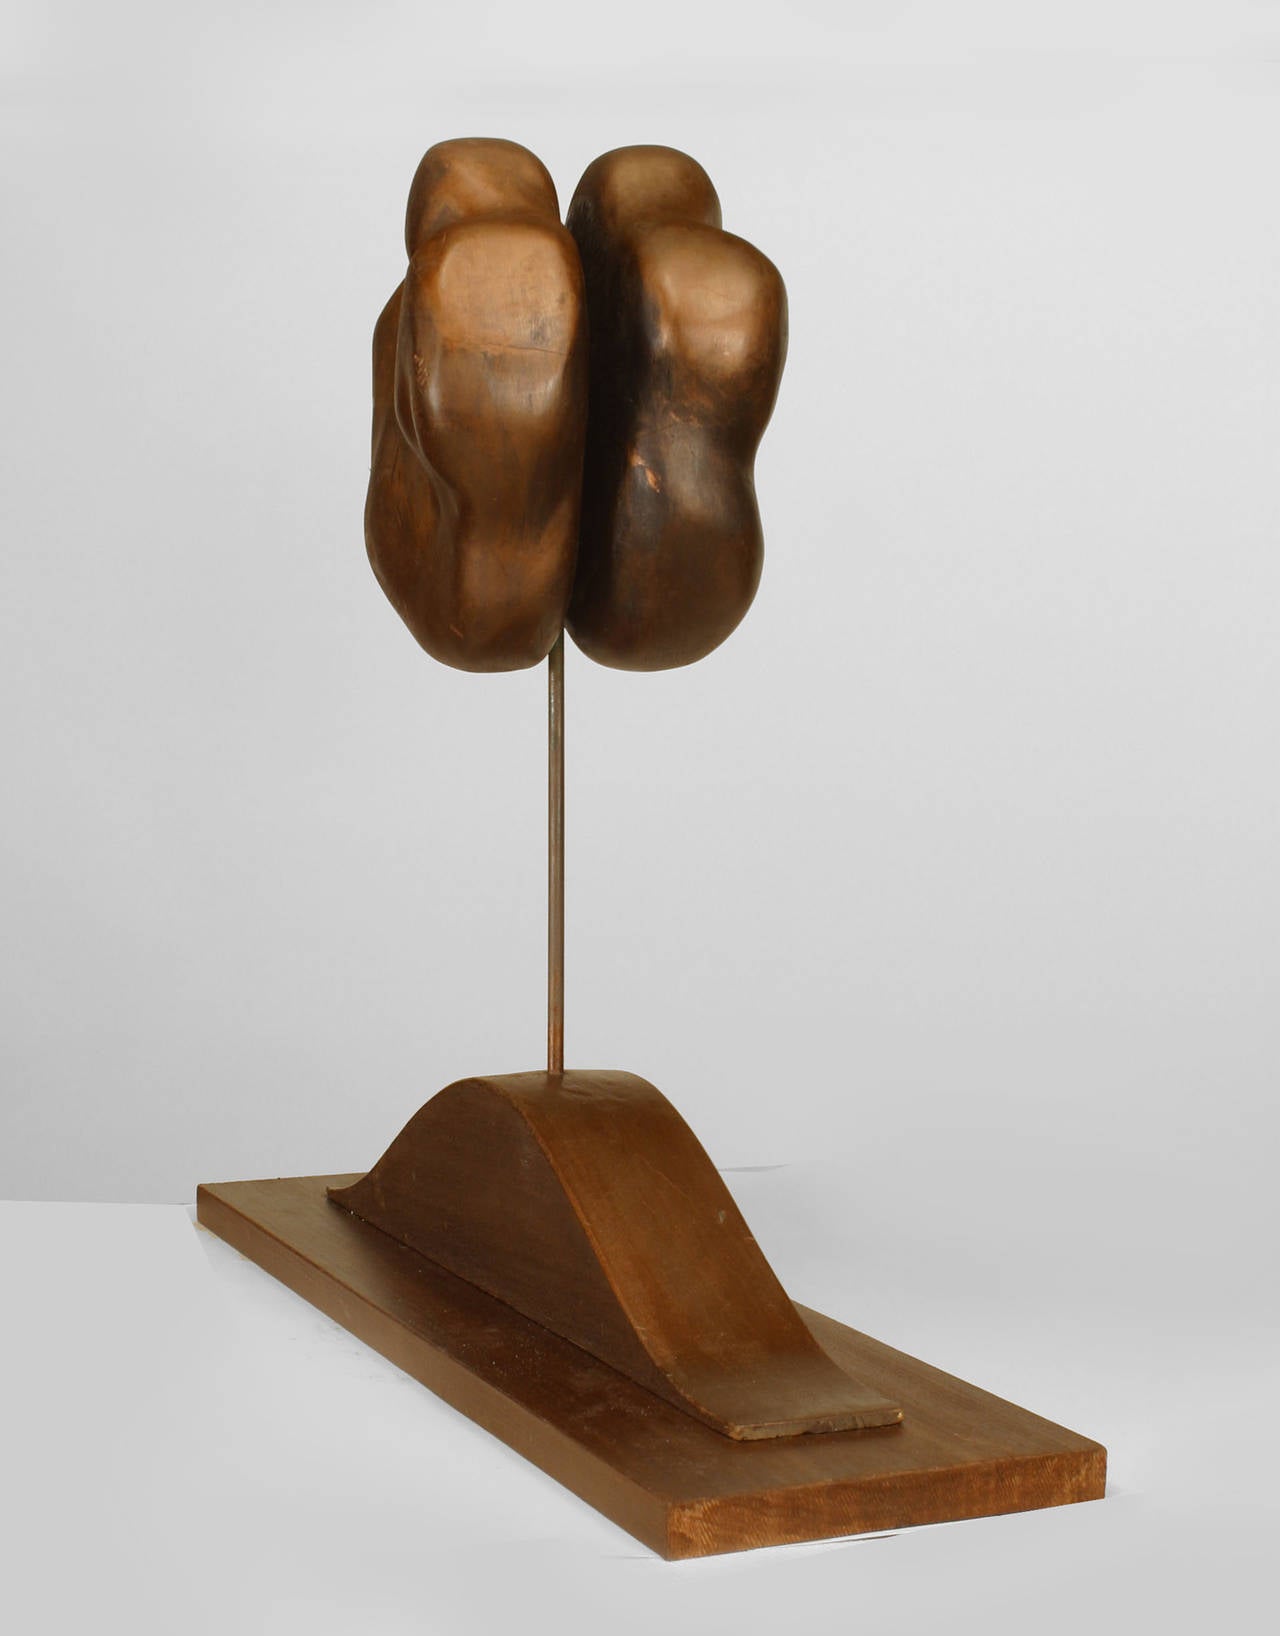 20th century American abstract wood sculpture of two parallel freeform spheres raised on a narrow base.